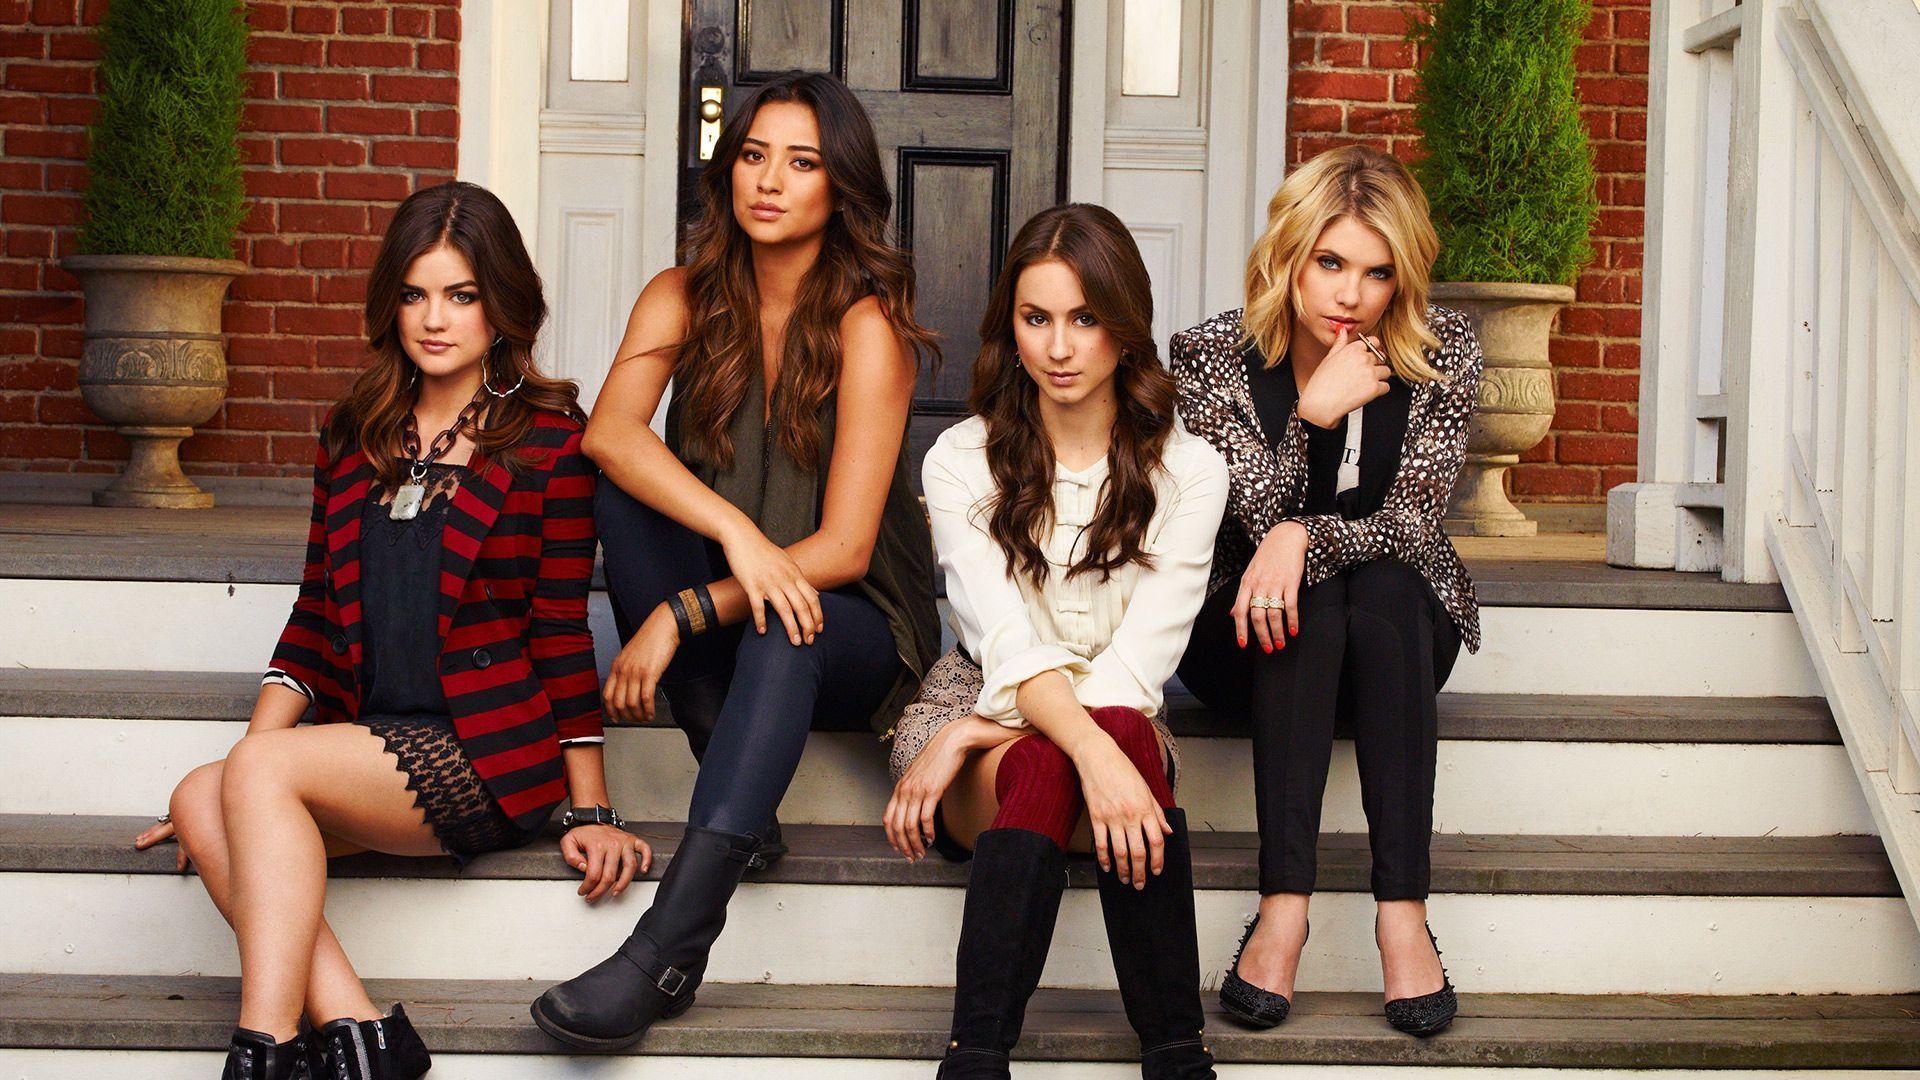 Pretty Little Liars Wallpapers 17829 1920x1080 px